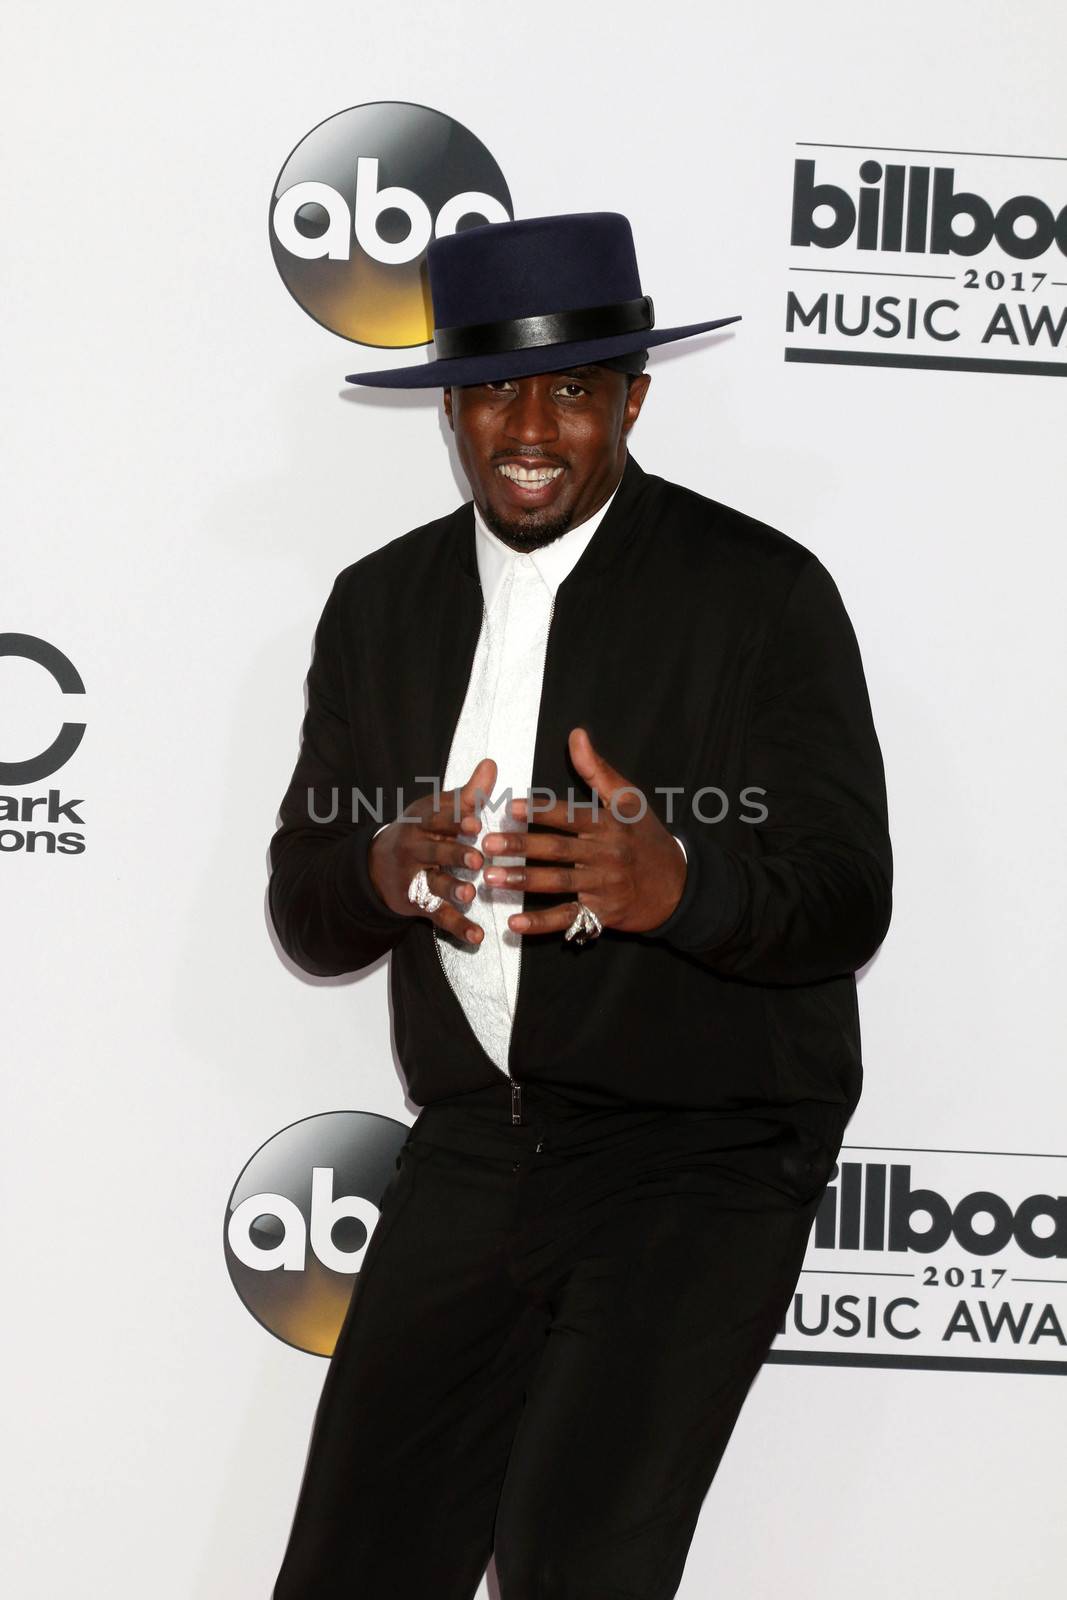 Sean Combs
at the 2017 Billboard Awards Press Room, T-Mobile Arena, Las Vegas, NV 05-21-17/ImageCollect by ImageCollect